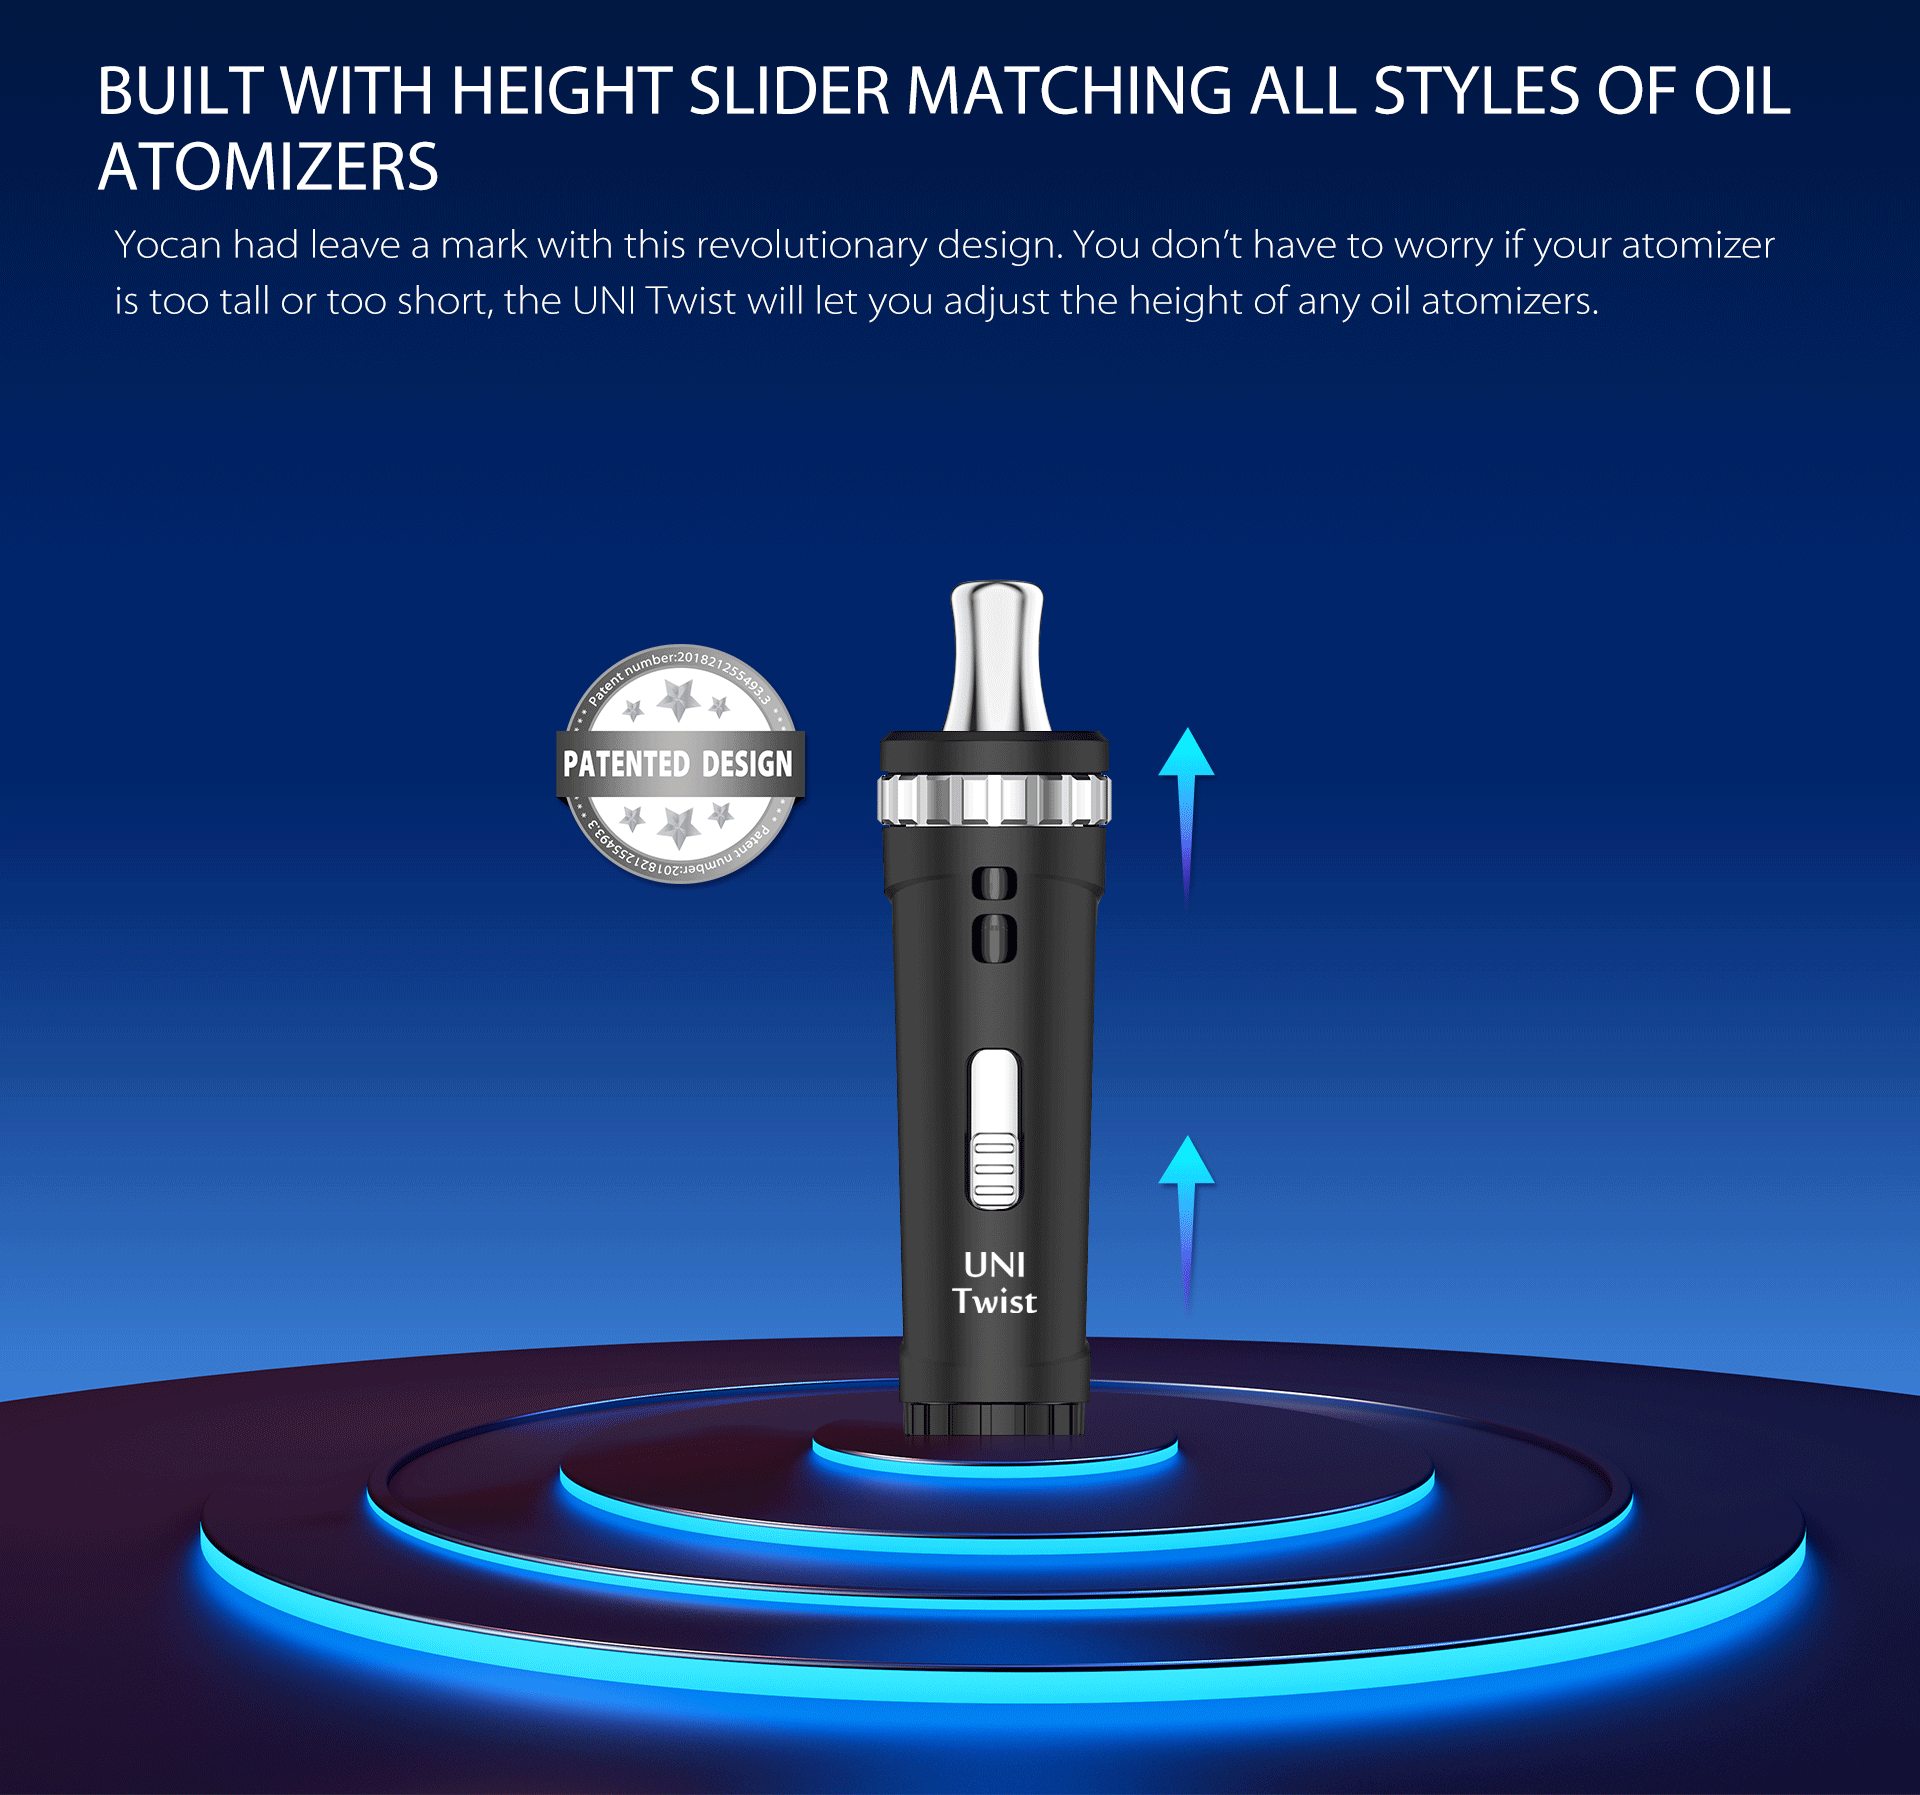 Yocan UNI Twist Universal Portable Mod Built With Height Slider Matching All Styles Of Oil Atomizers